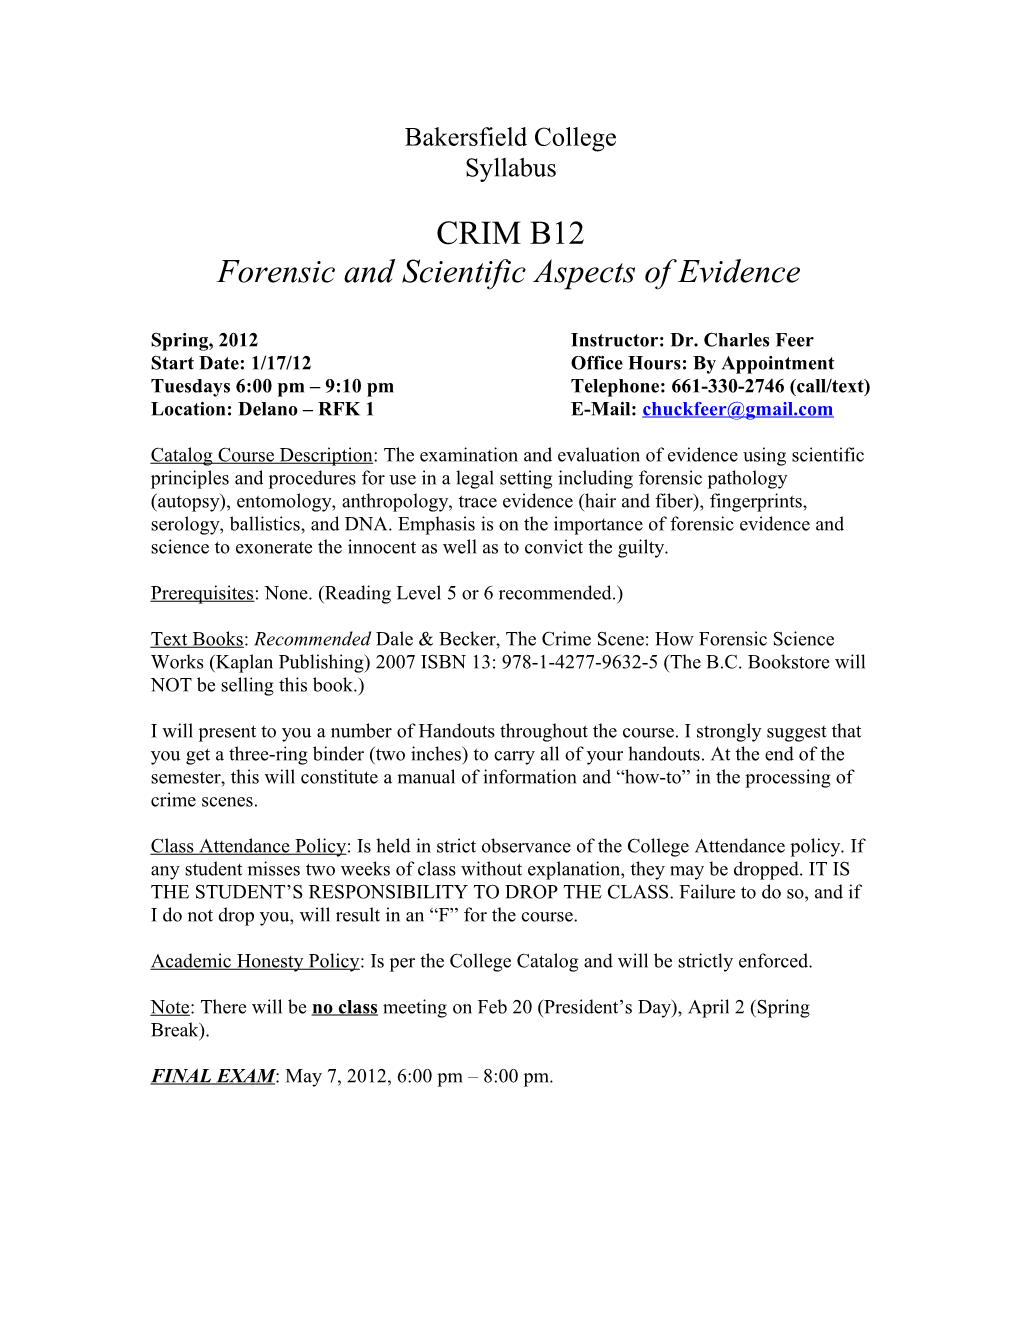 Forensic and Scientific Aspects of Evidence